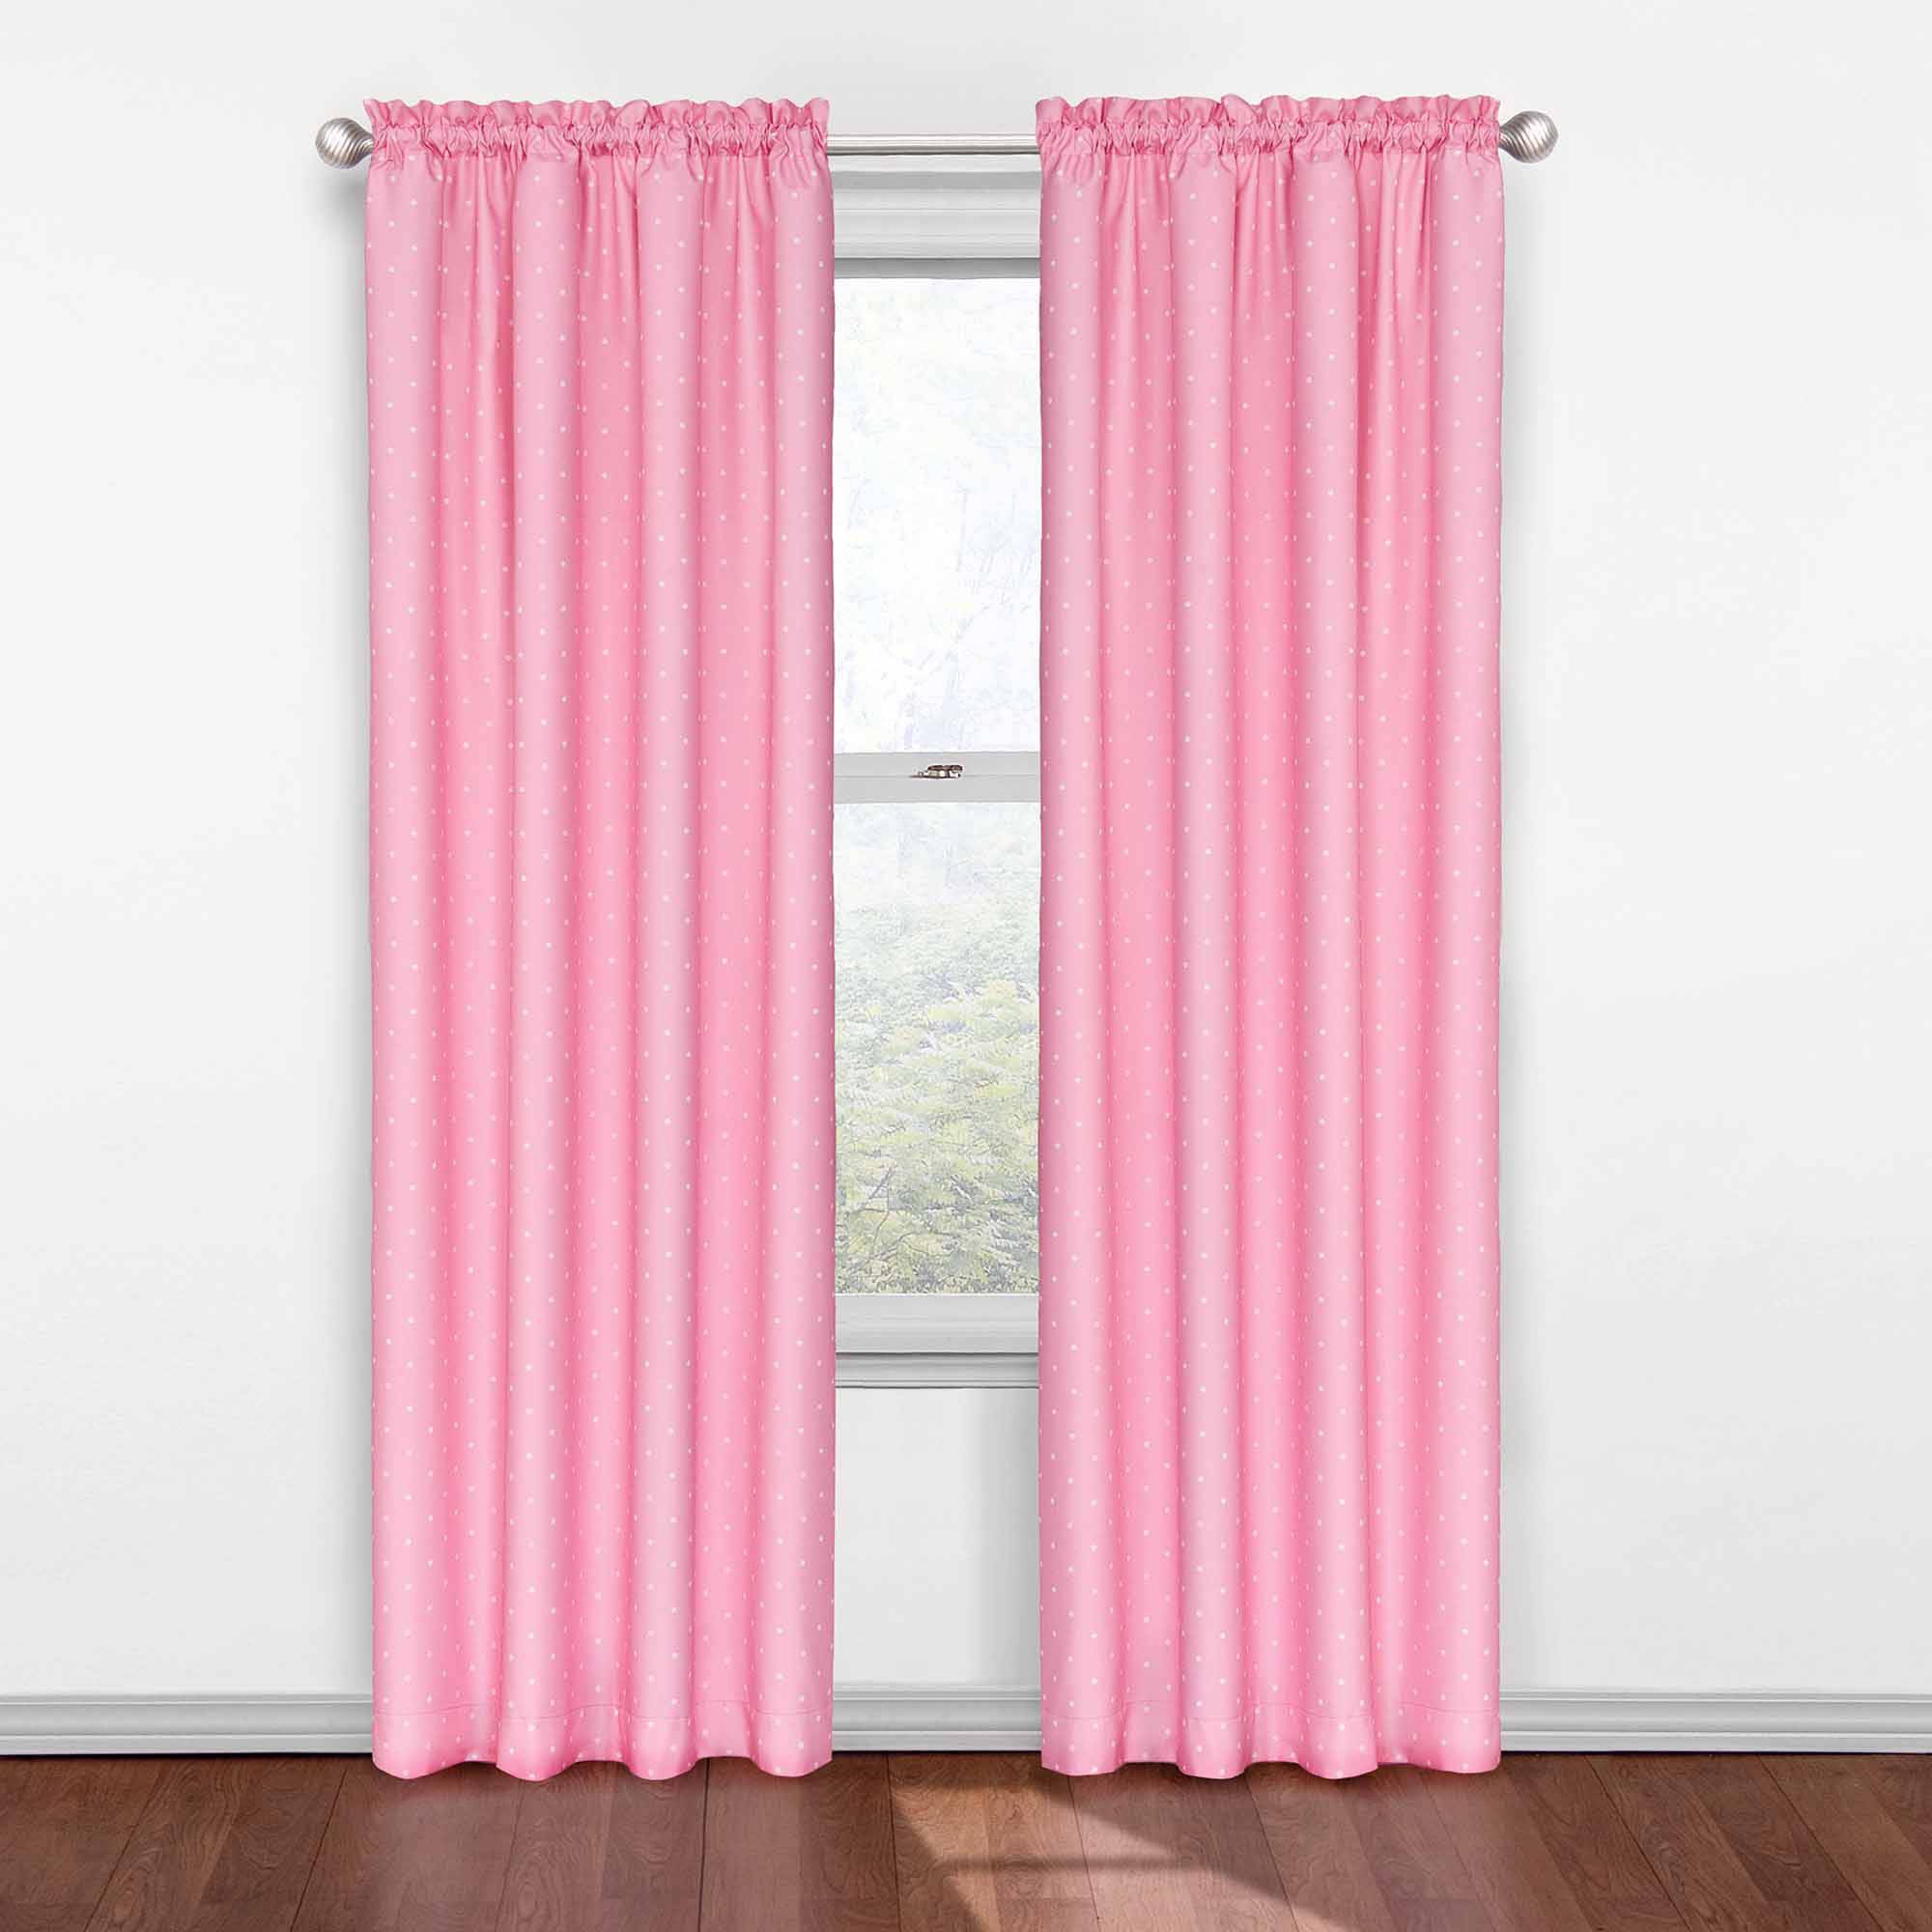 pink curtains eclipse dots blackout thermal girls bedroom curtain panel - walmart.com VHUOZJC